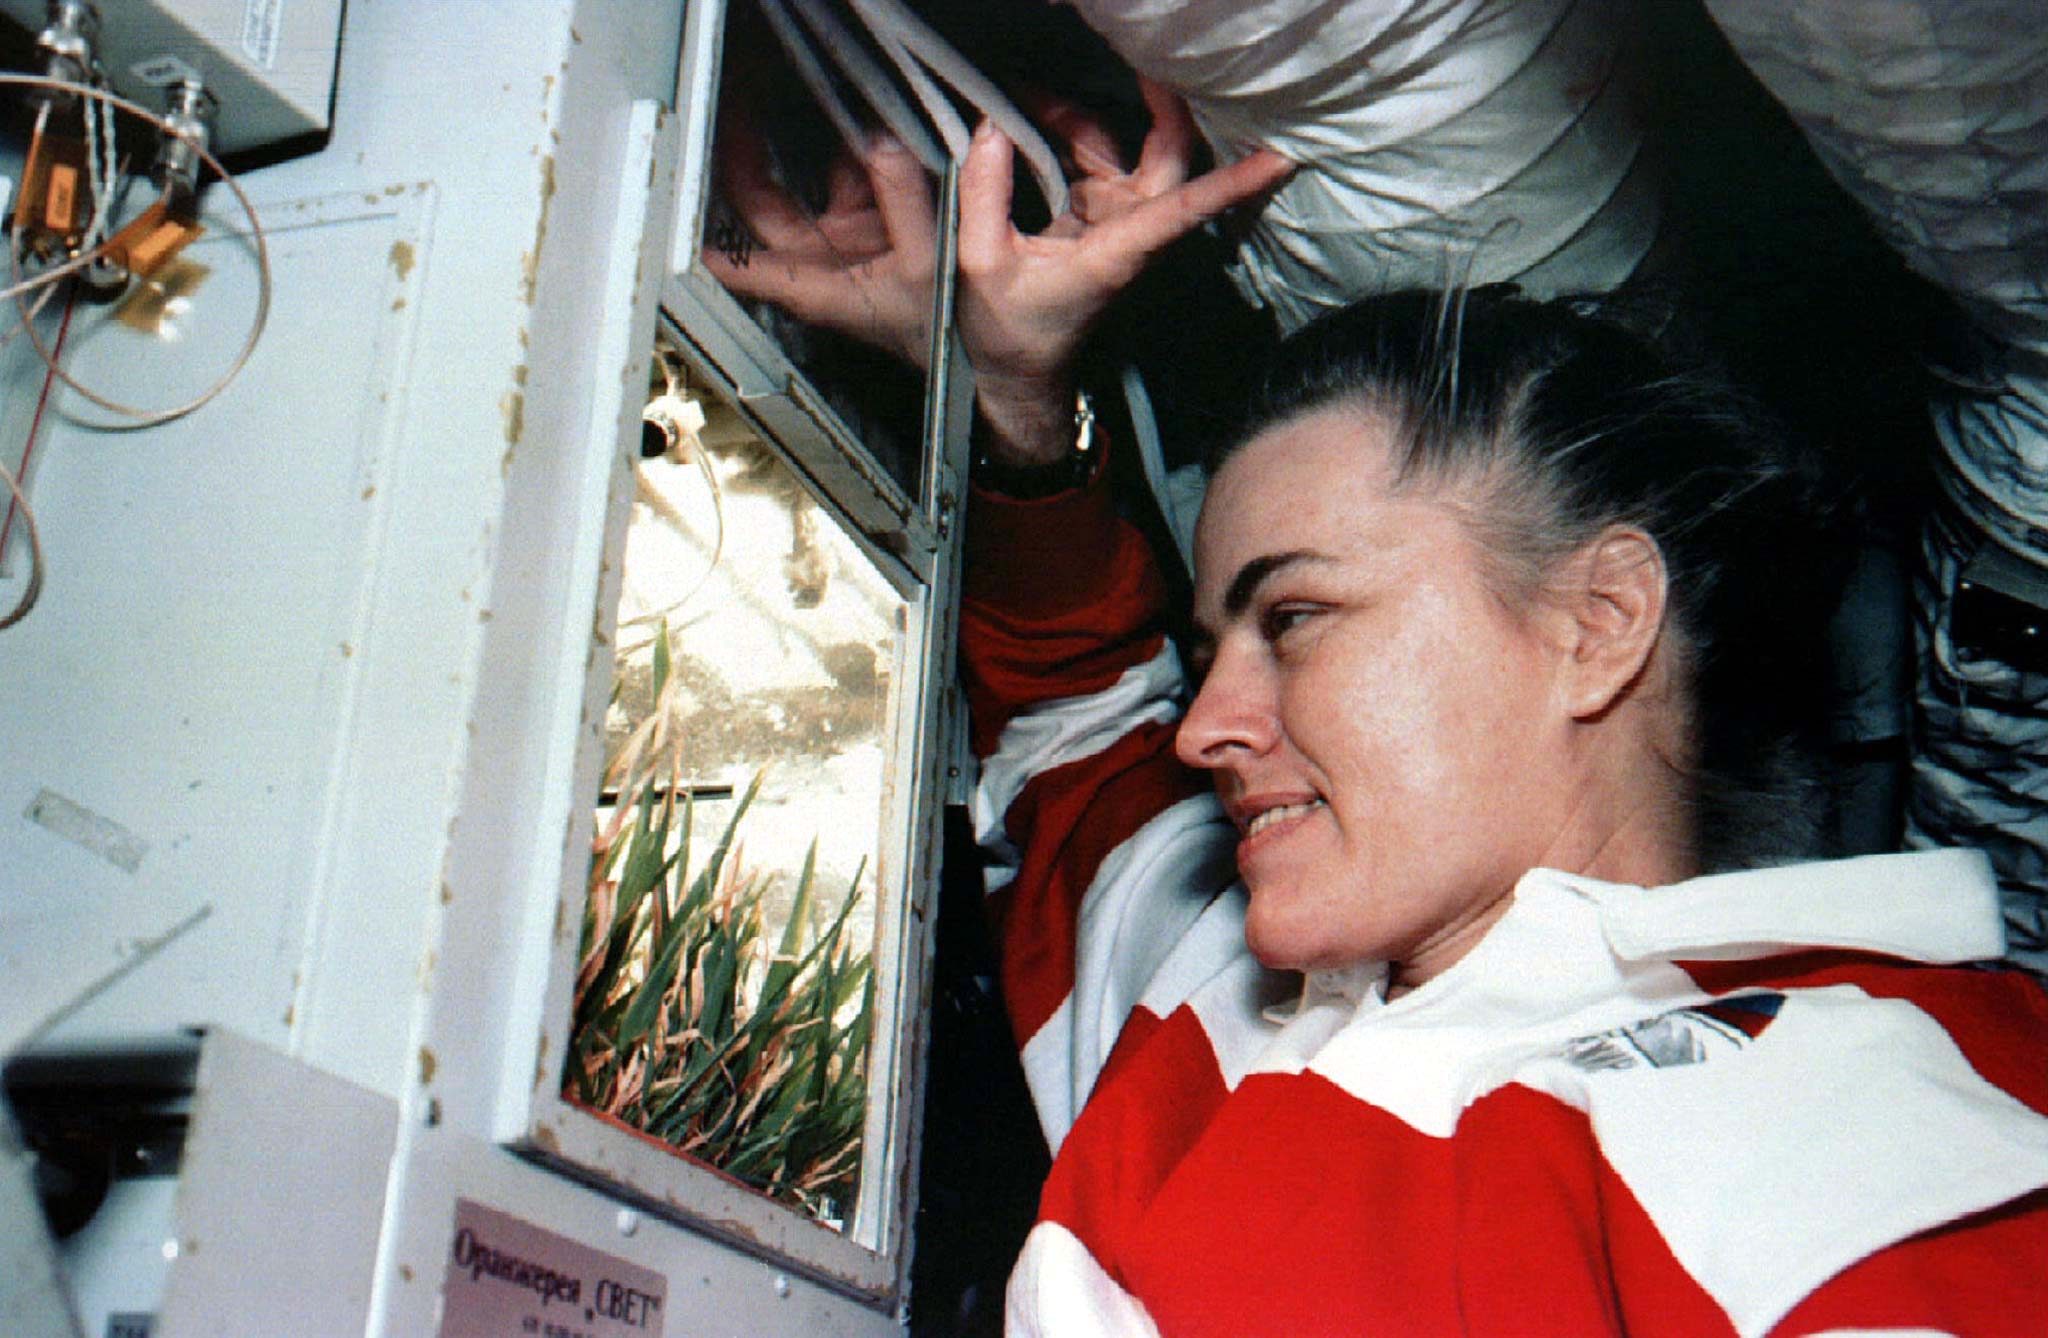 Astronaut Shannon Lucid, who concluded a U.S. record setting six-month voyage aboard Mir, checks on wheat plants on Sept. 23, 1996.